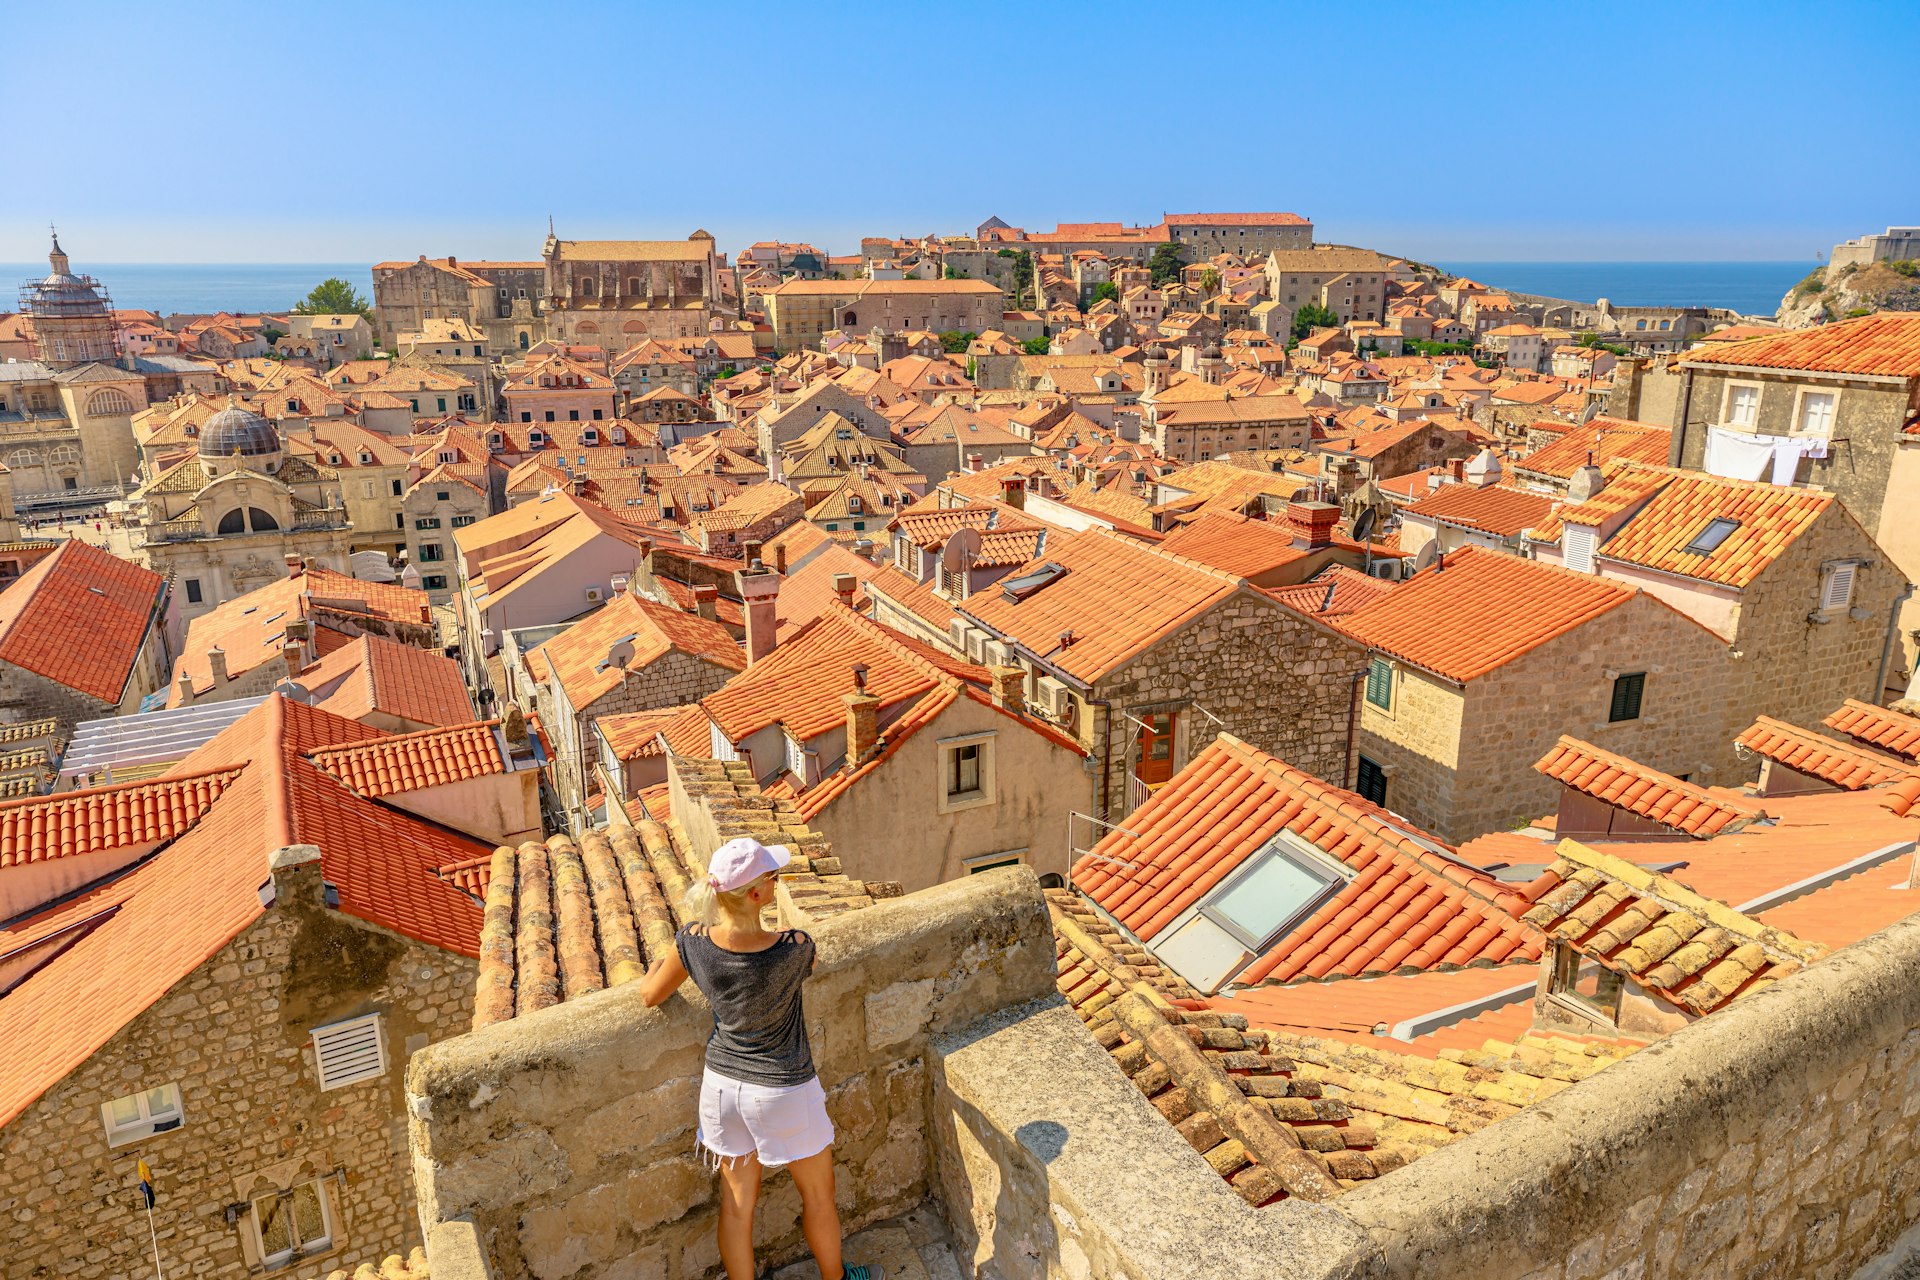 A woman seen from behind looking out onto the red-tiled roofs of an old town